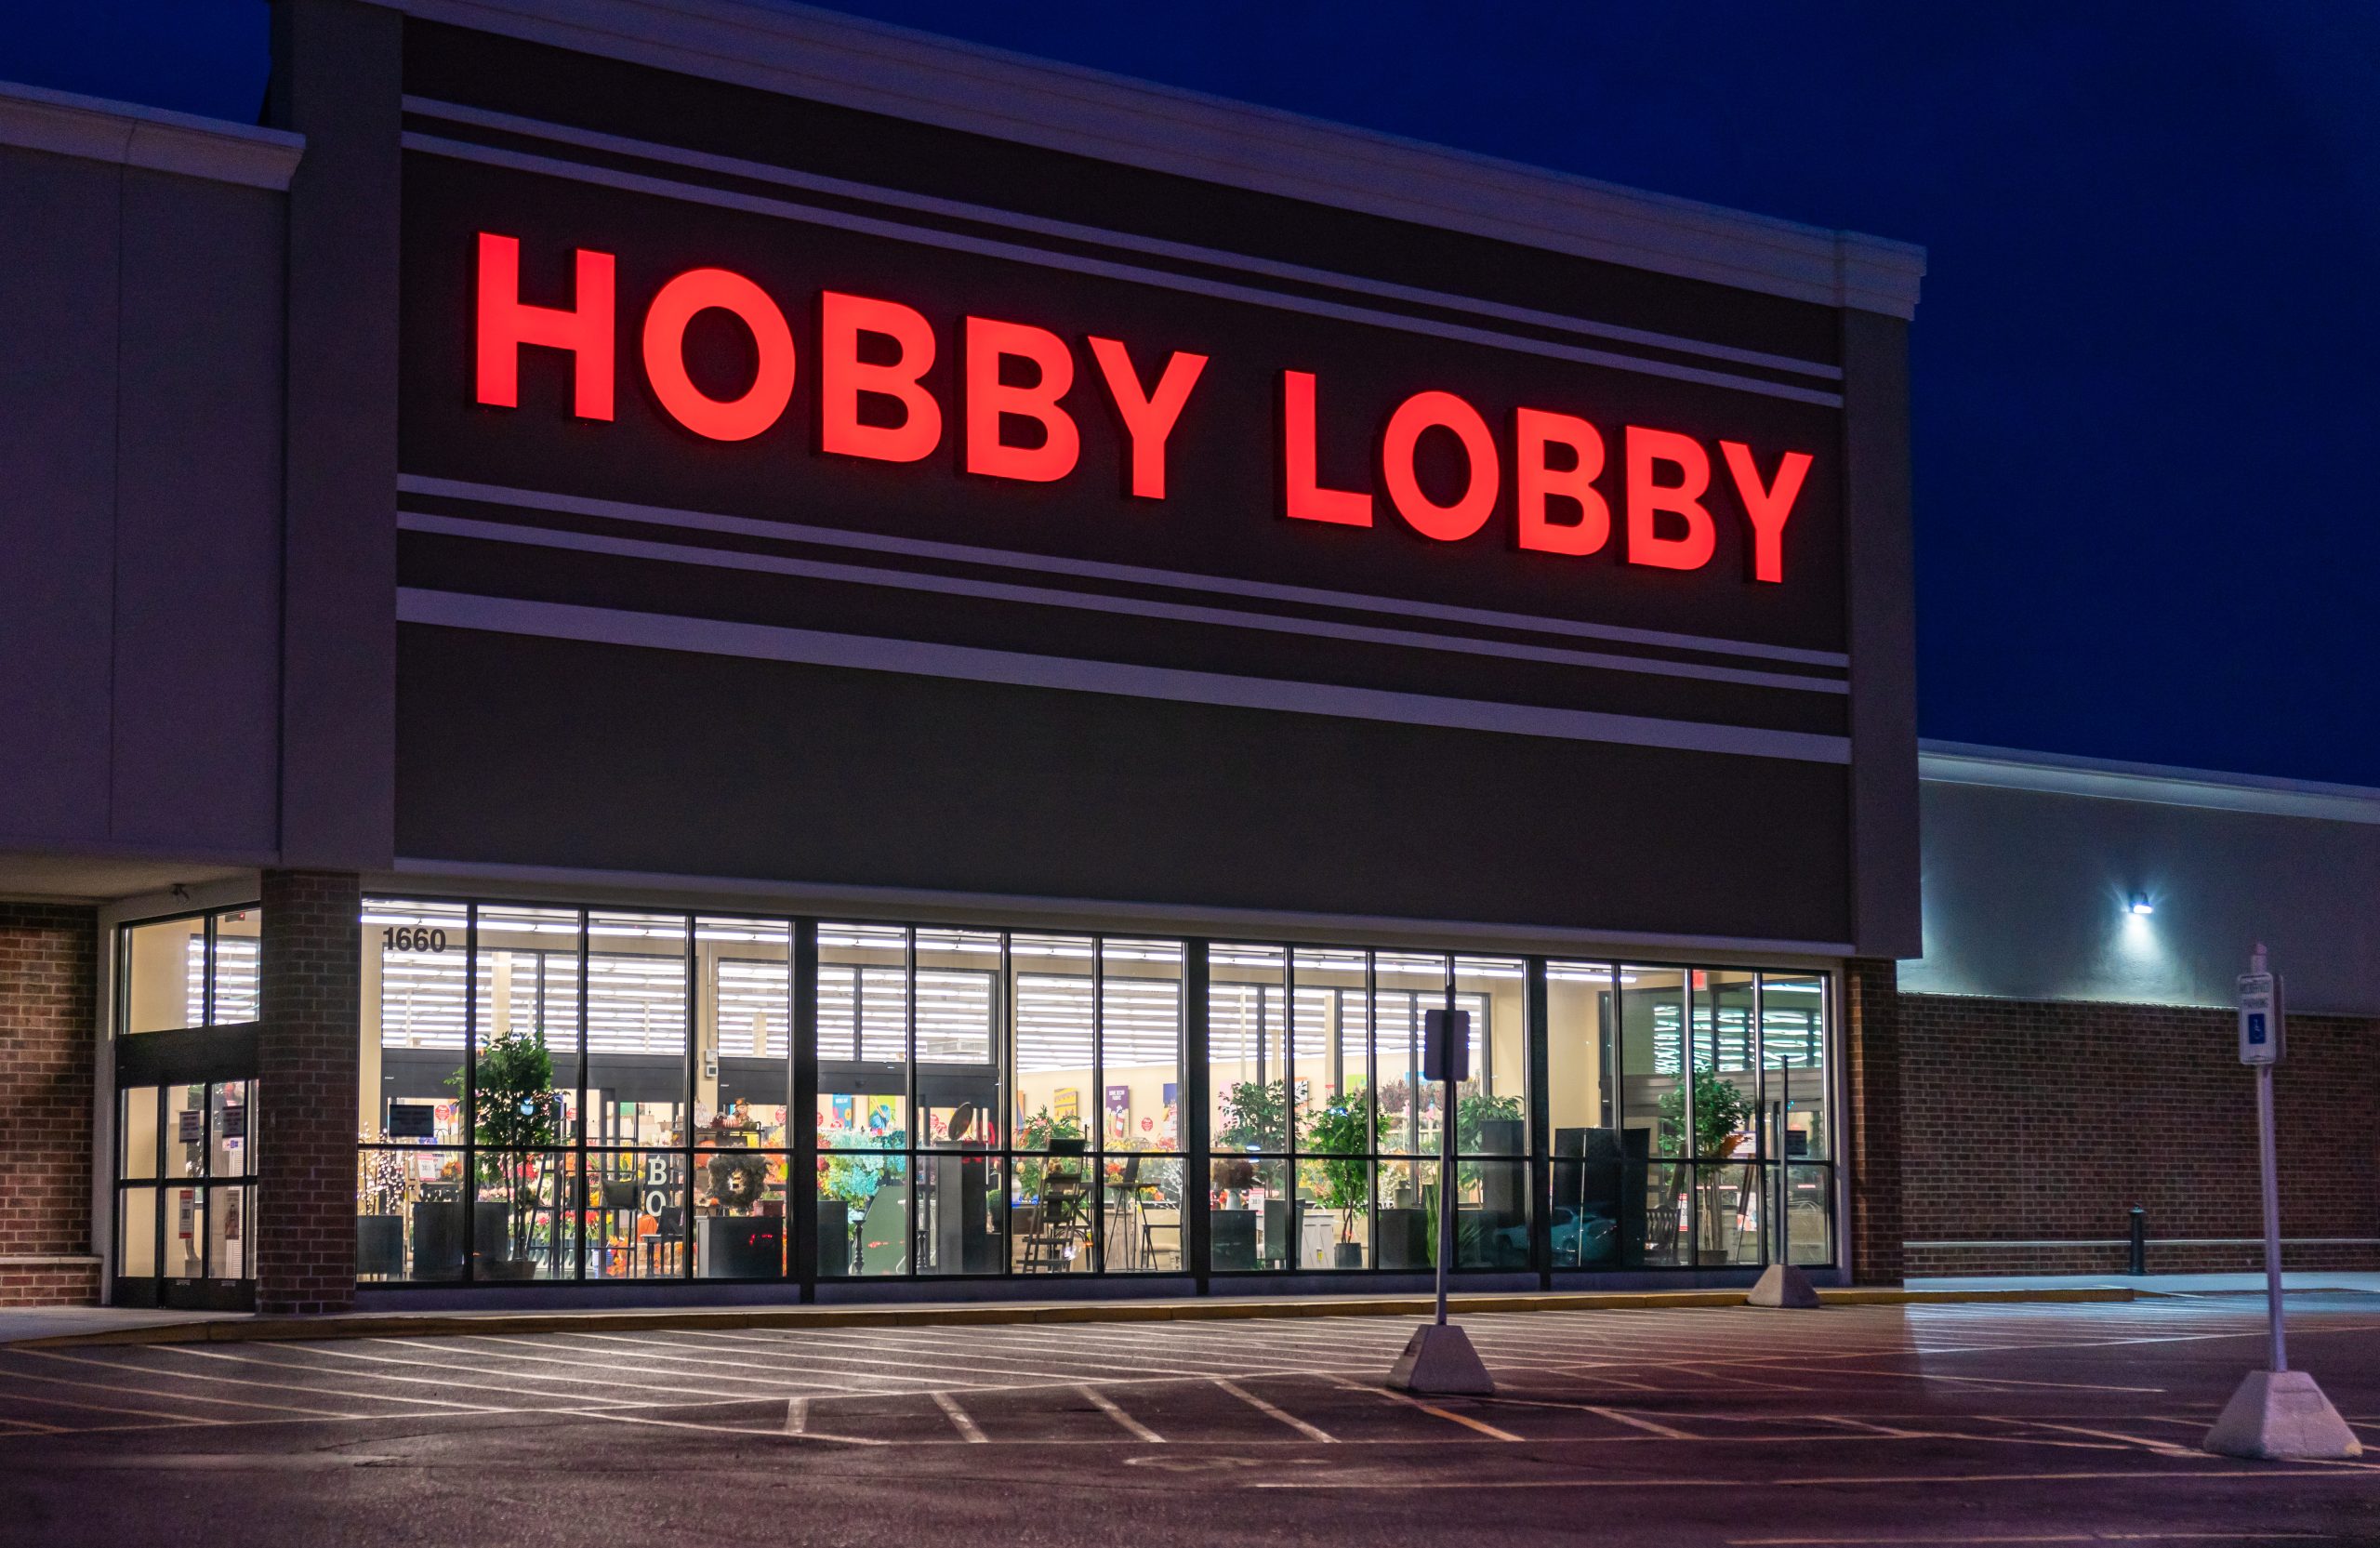 3D Channel Letters Storefront Signage for Hobby Lobby